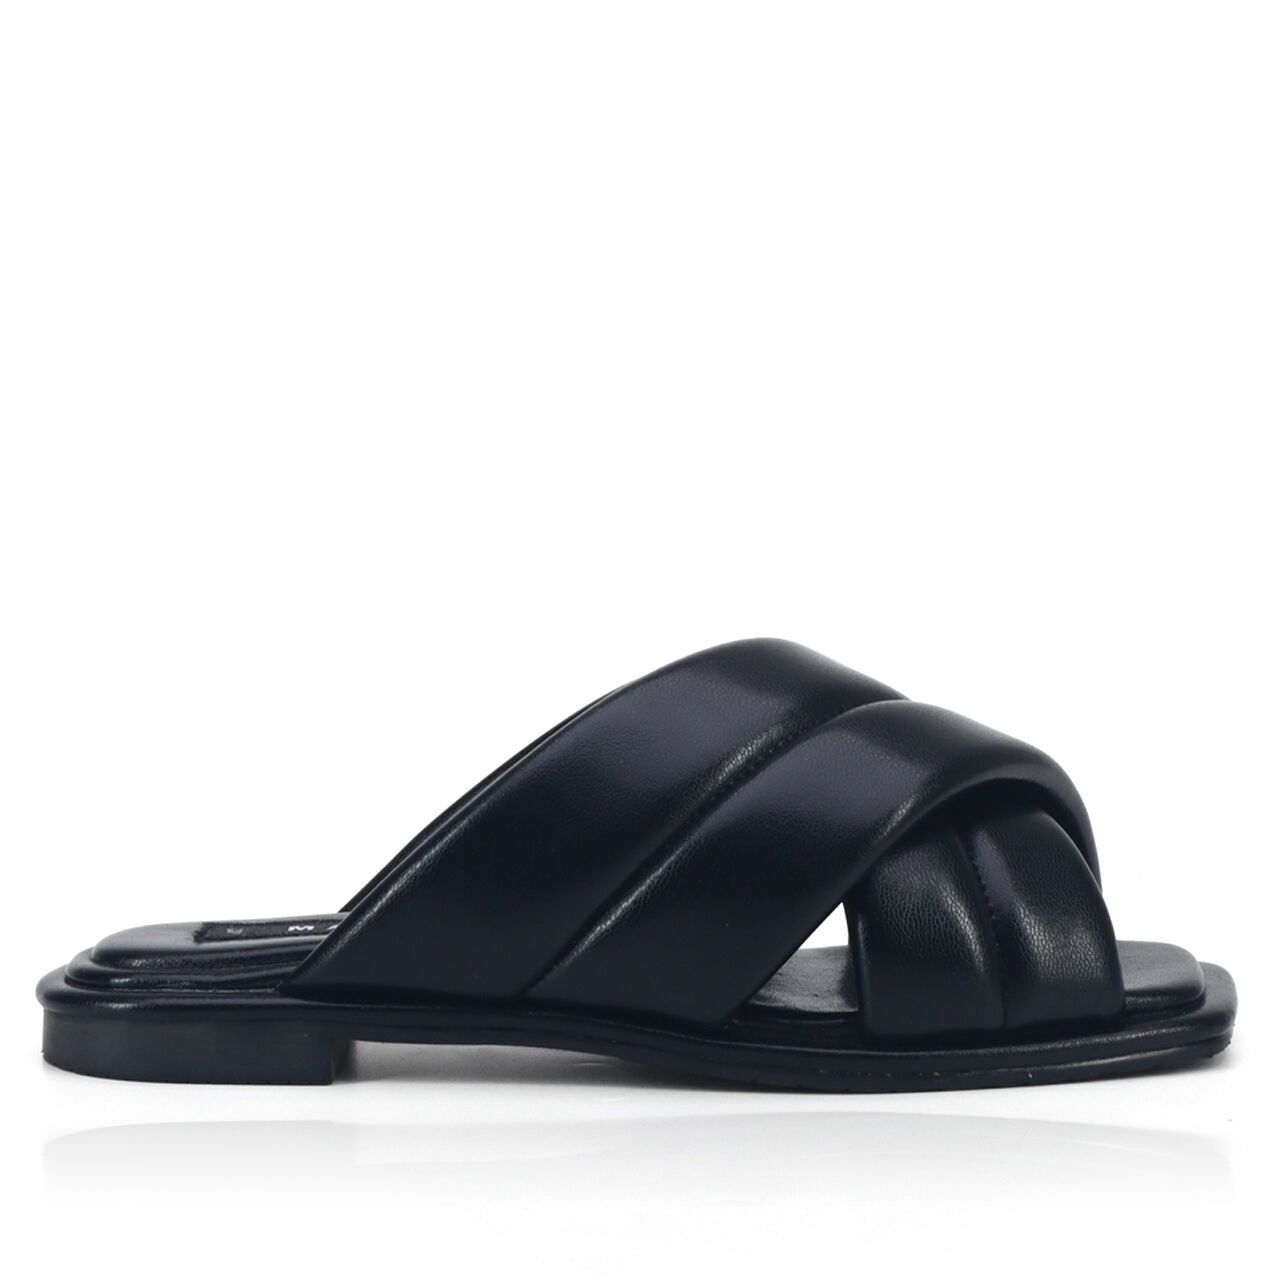 Mader Michelin Crossover Blackout Sandals